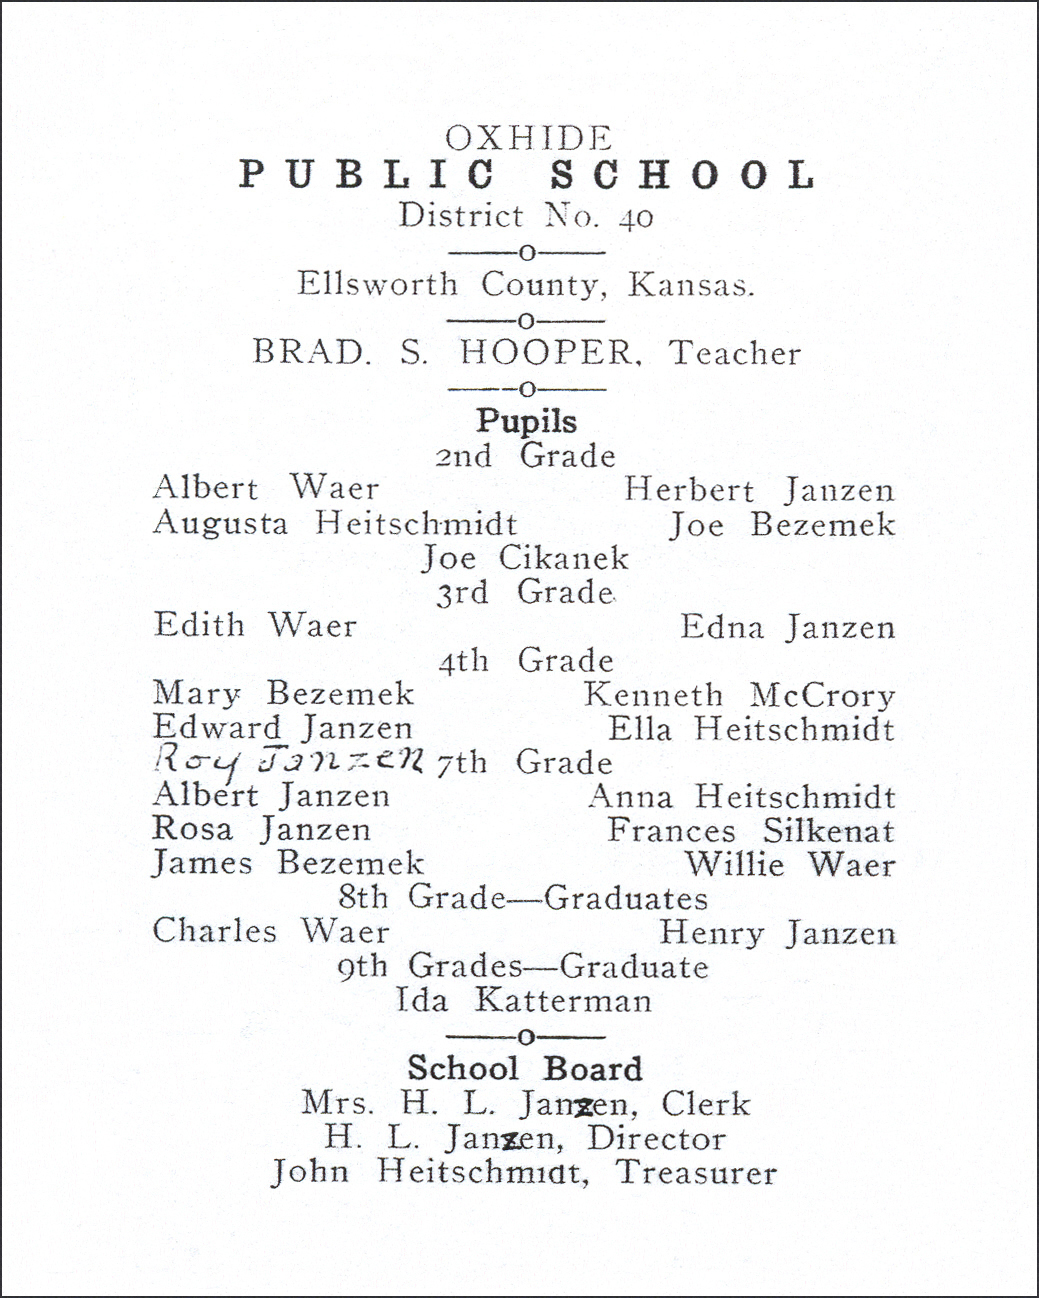 Roster from the Oxhide Public School for 1909